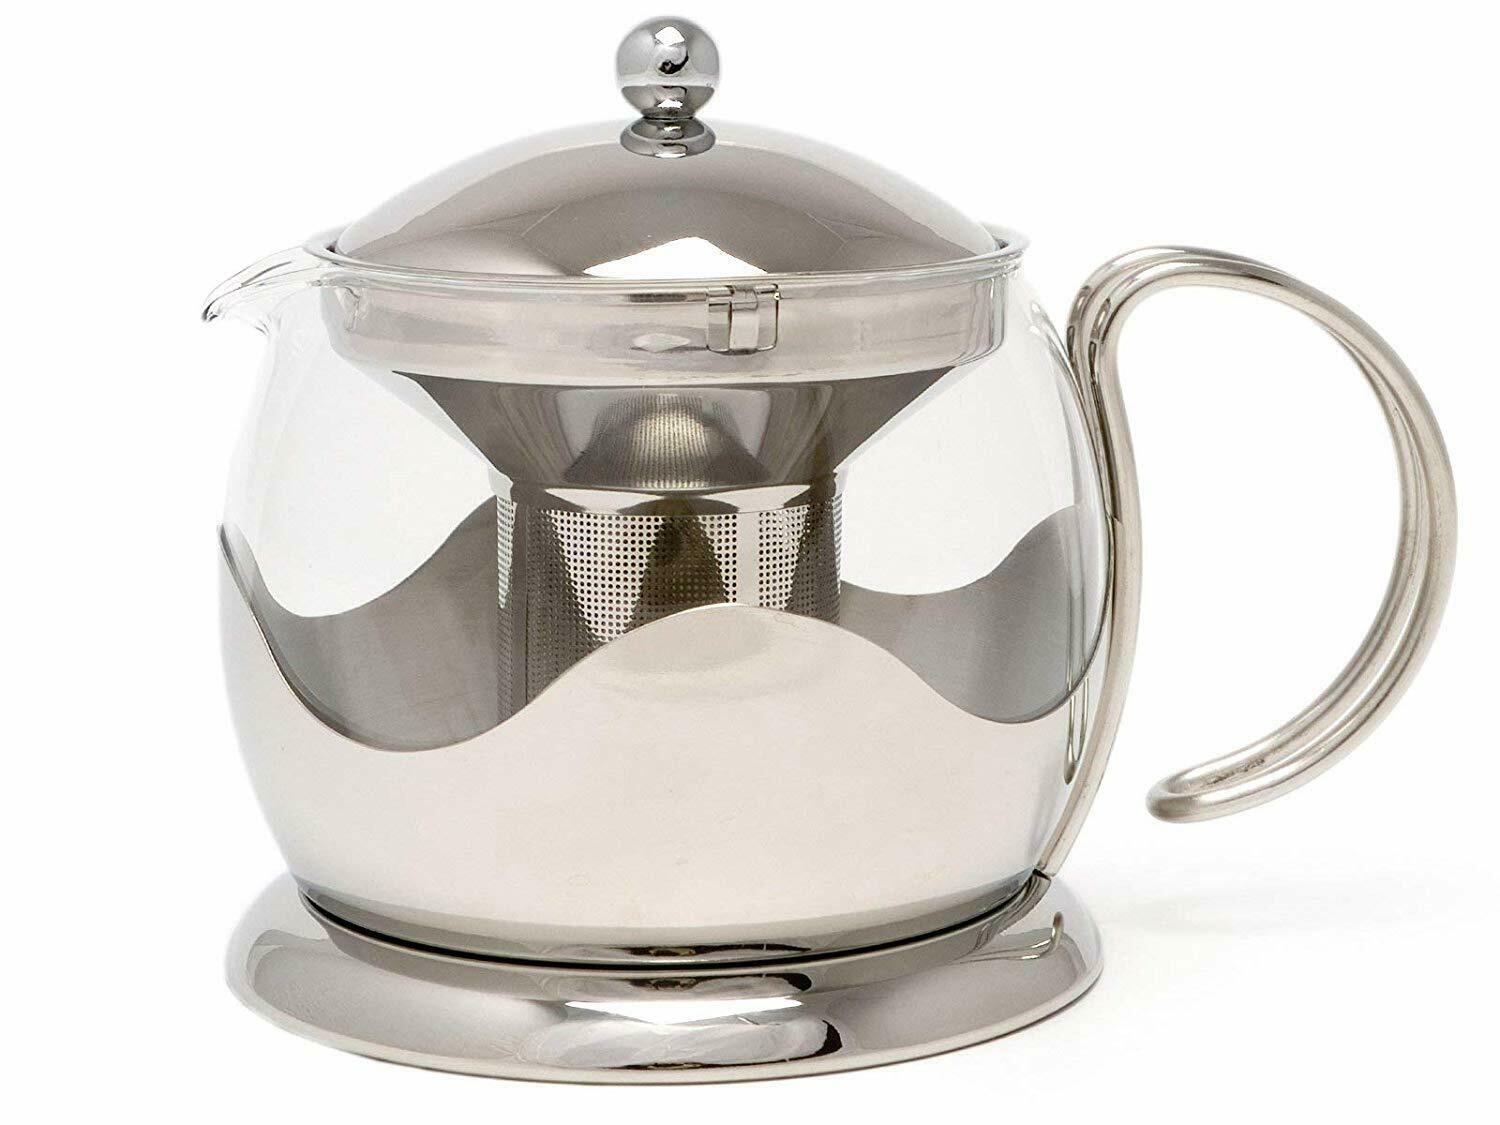 A 660ml Stainless Steel and glass teapot from La Cafetiere. Includes a stainless steel tea infuser or filter inside